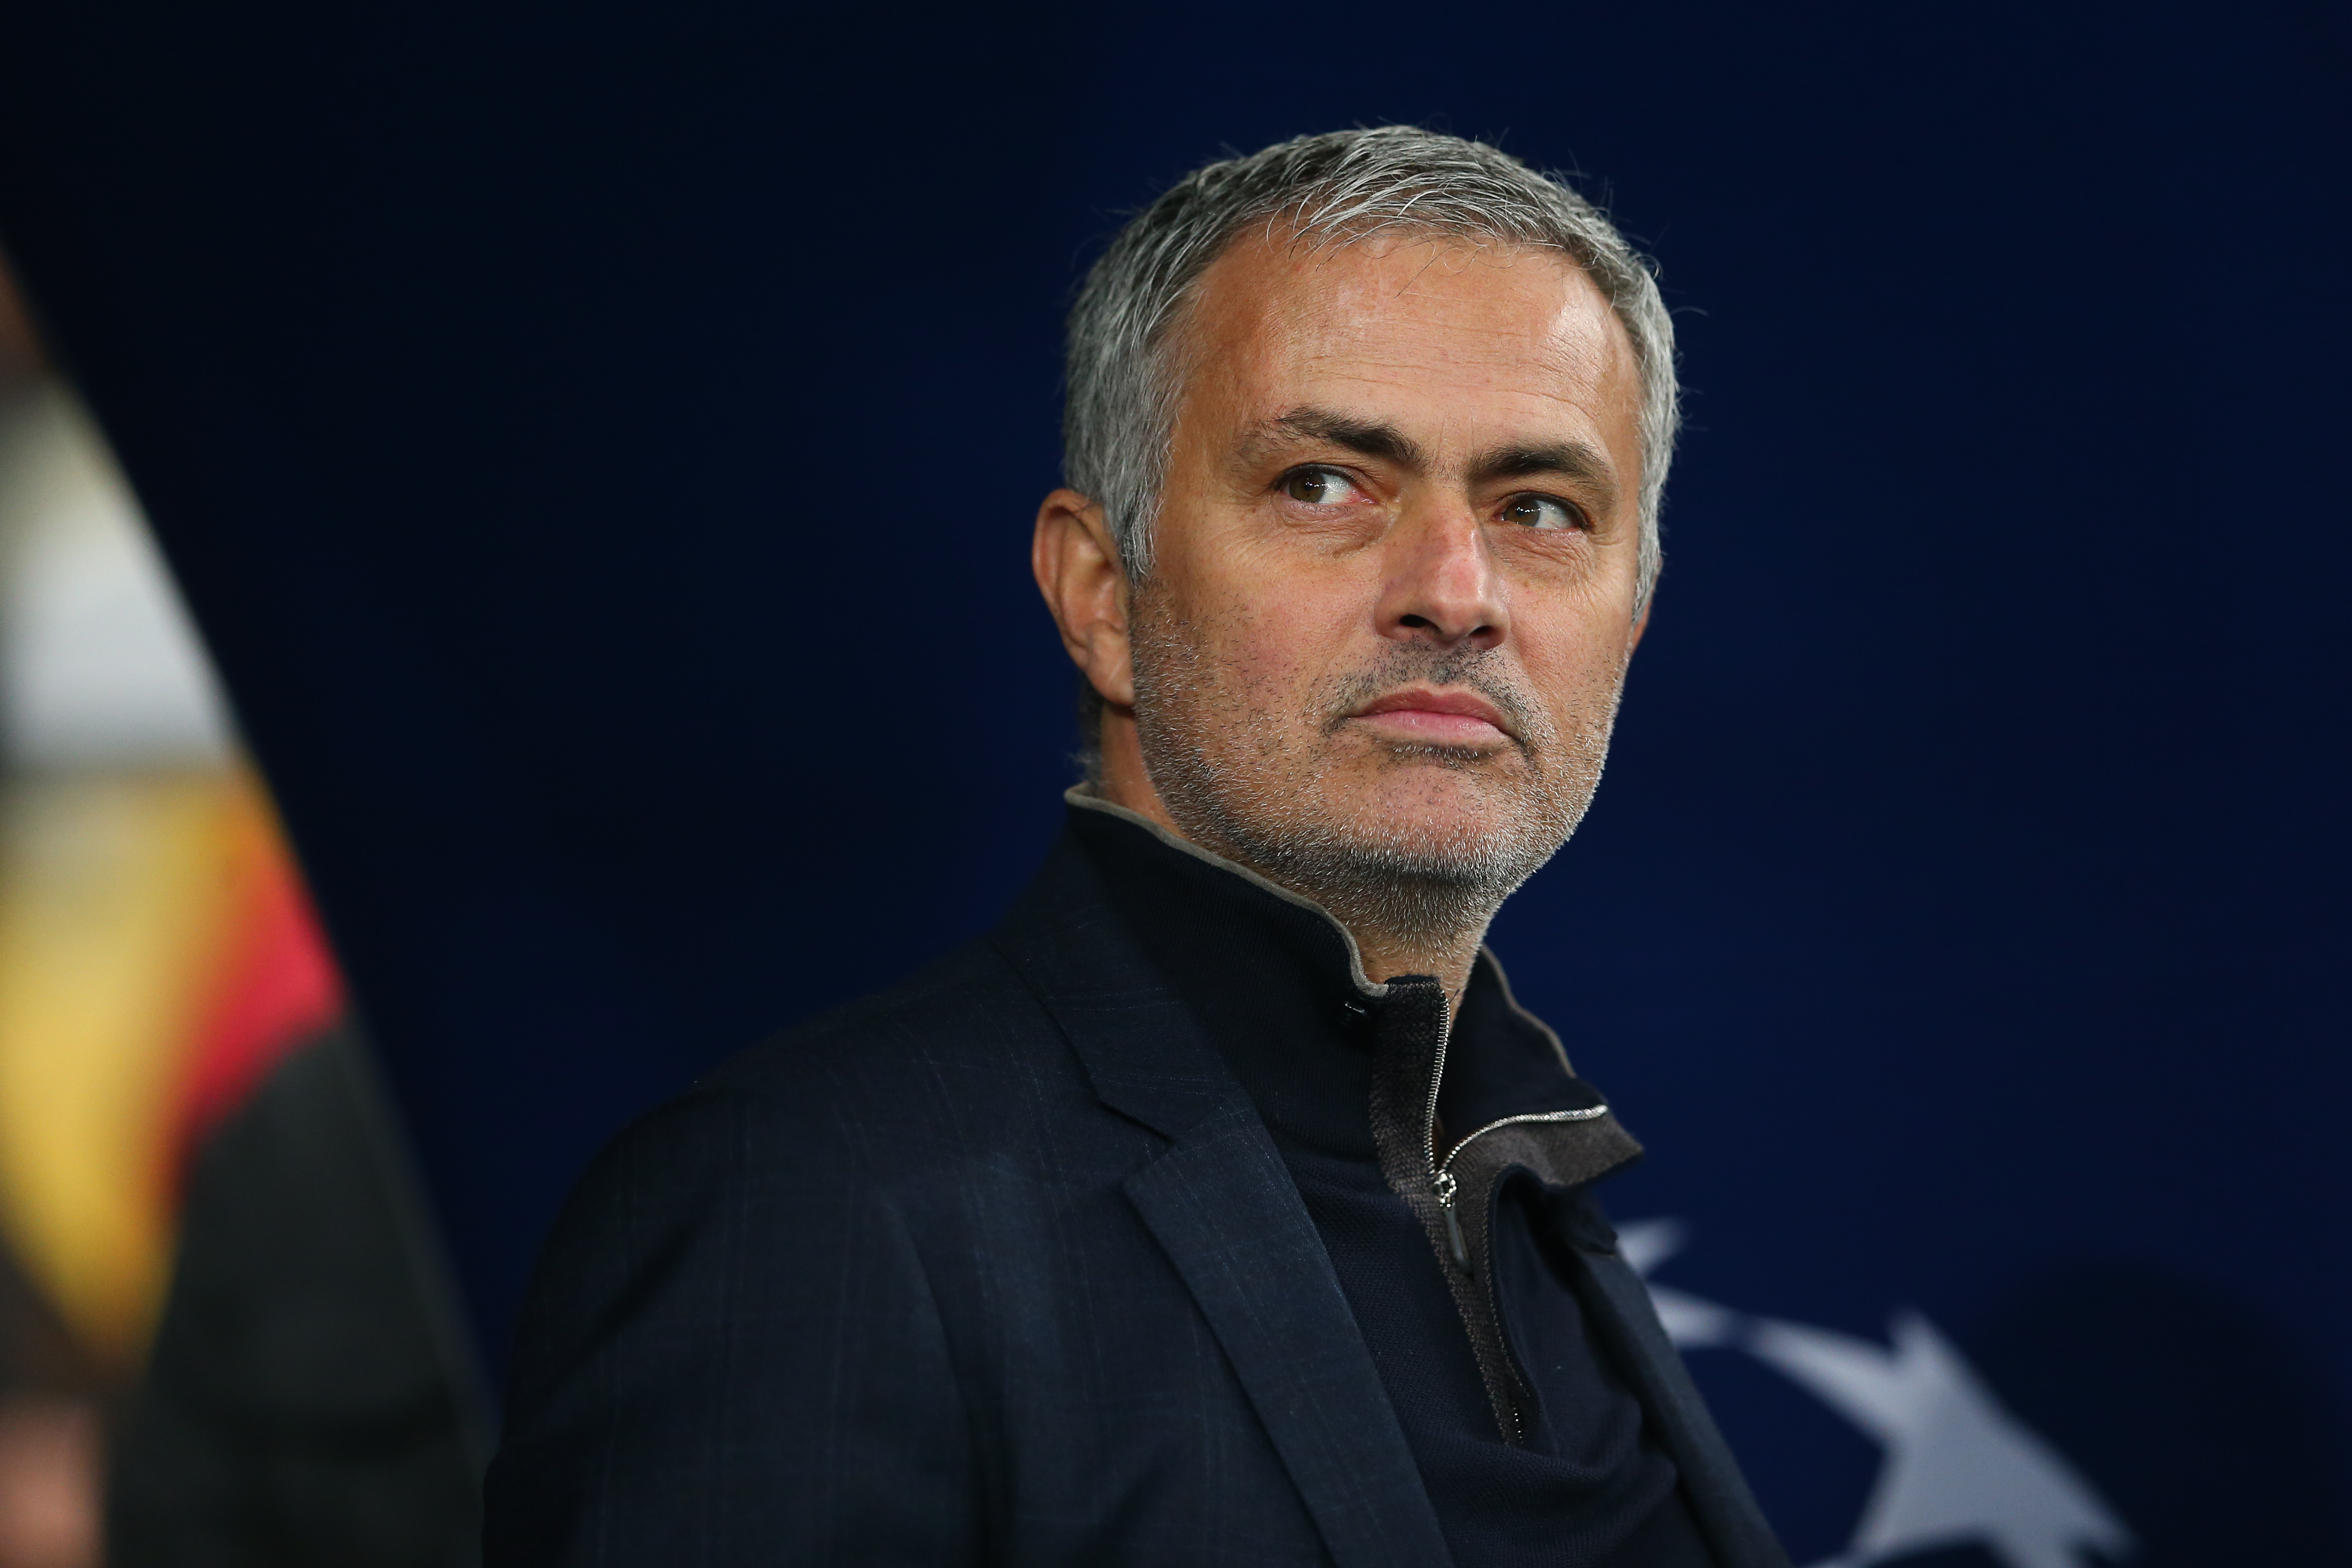 Trade mark news on LinkedIn: will Spurs have to pay Chelsea for José Mourinho trade marks?